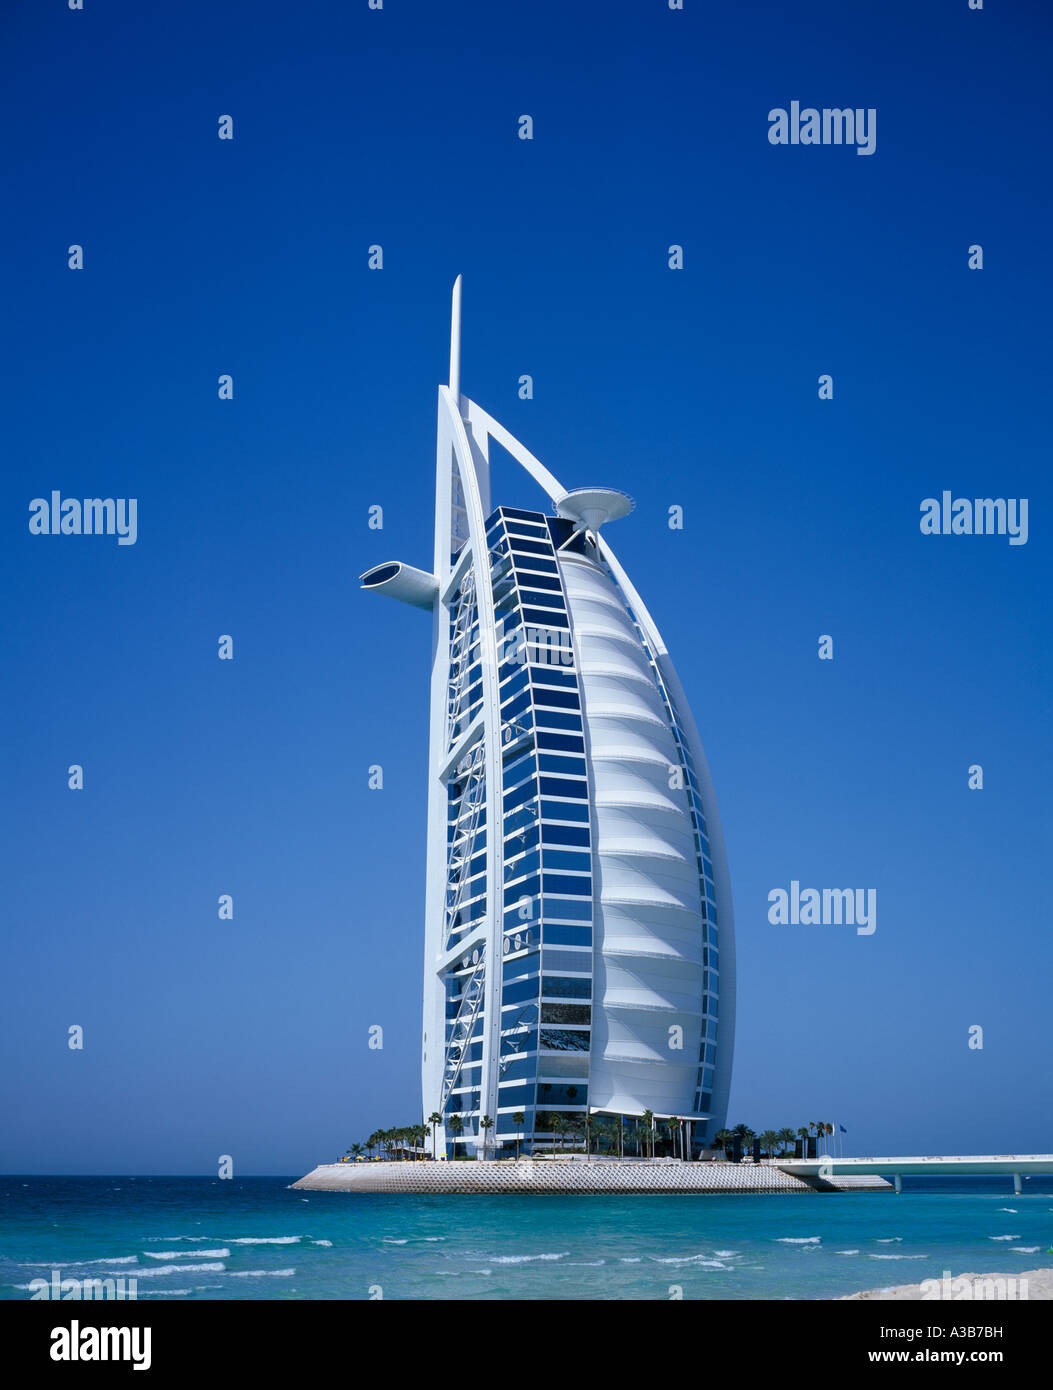 UAE Middle East Gulf State Dubai 6 Star Burj Al Arab Hotel on Jumeirah Beach on an offshore island with causeway leading to it Stock Photo